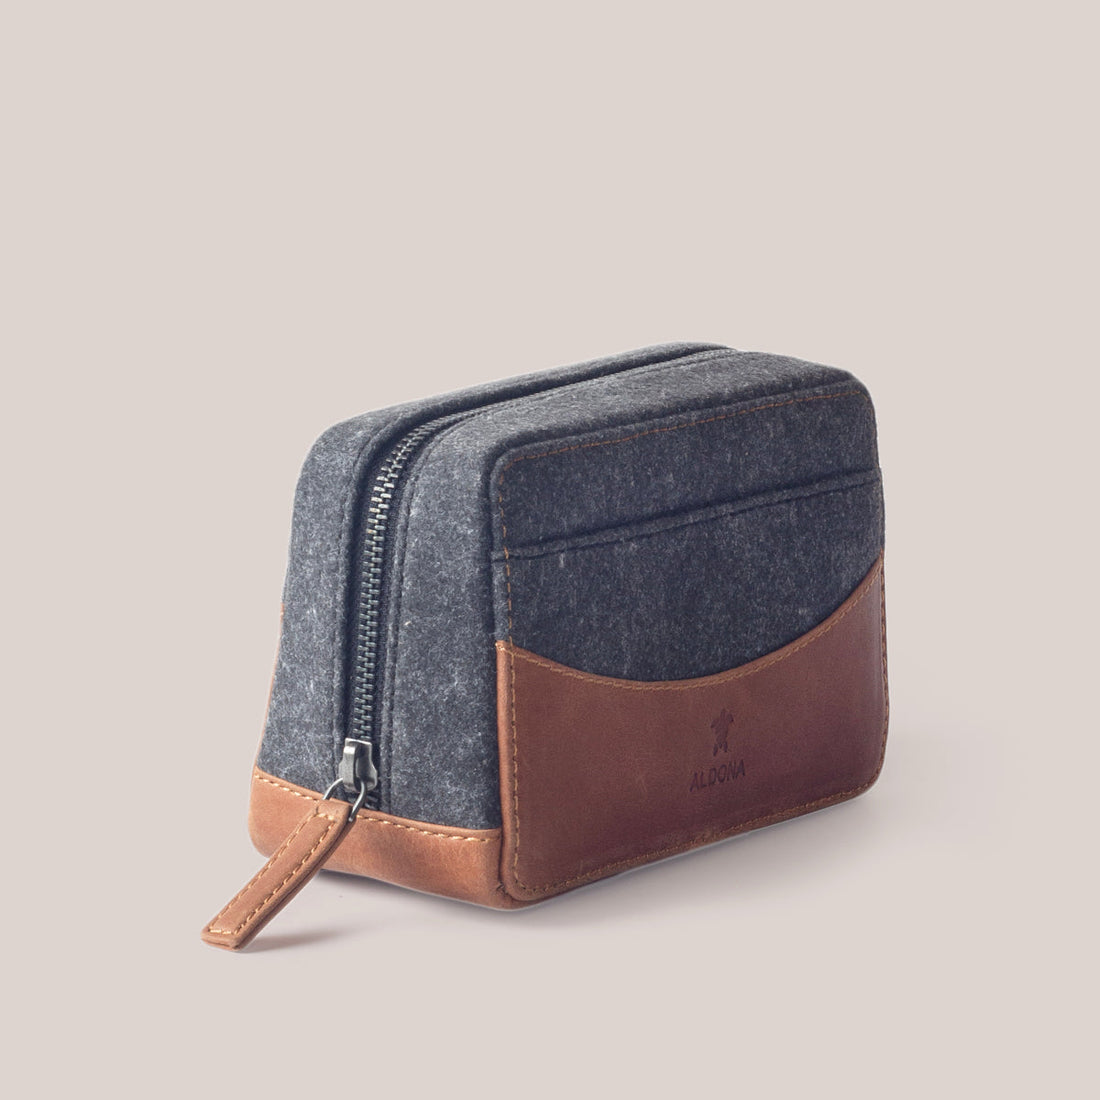 Leather Accessory Pouch - Felt and Tan Crunch